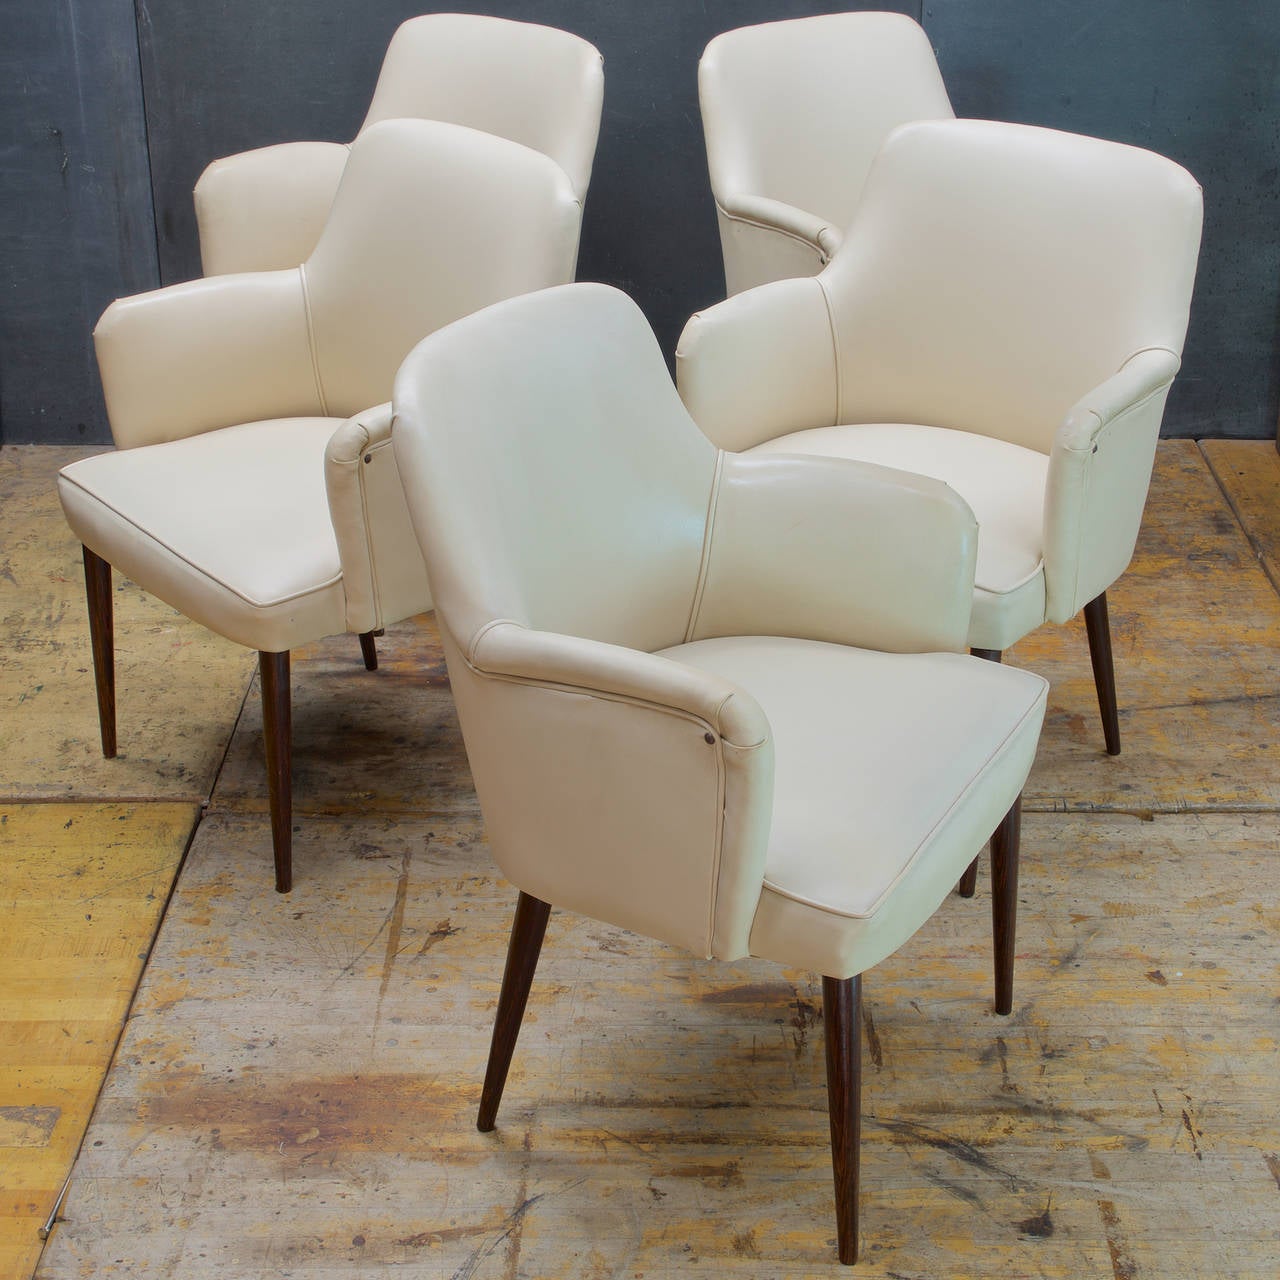 Set of Four, and the fifth one is Free.

Hardwood Pencil-Leg Dining Armchairs, Wood Grain looks like Rosewood or Wenge.  In Original Off-White Vinyl Upholstery. These are Presented in As-Found Condition, however these chairs are Useable and